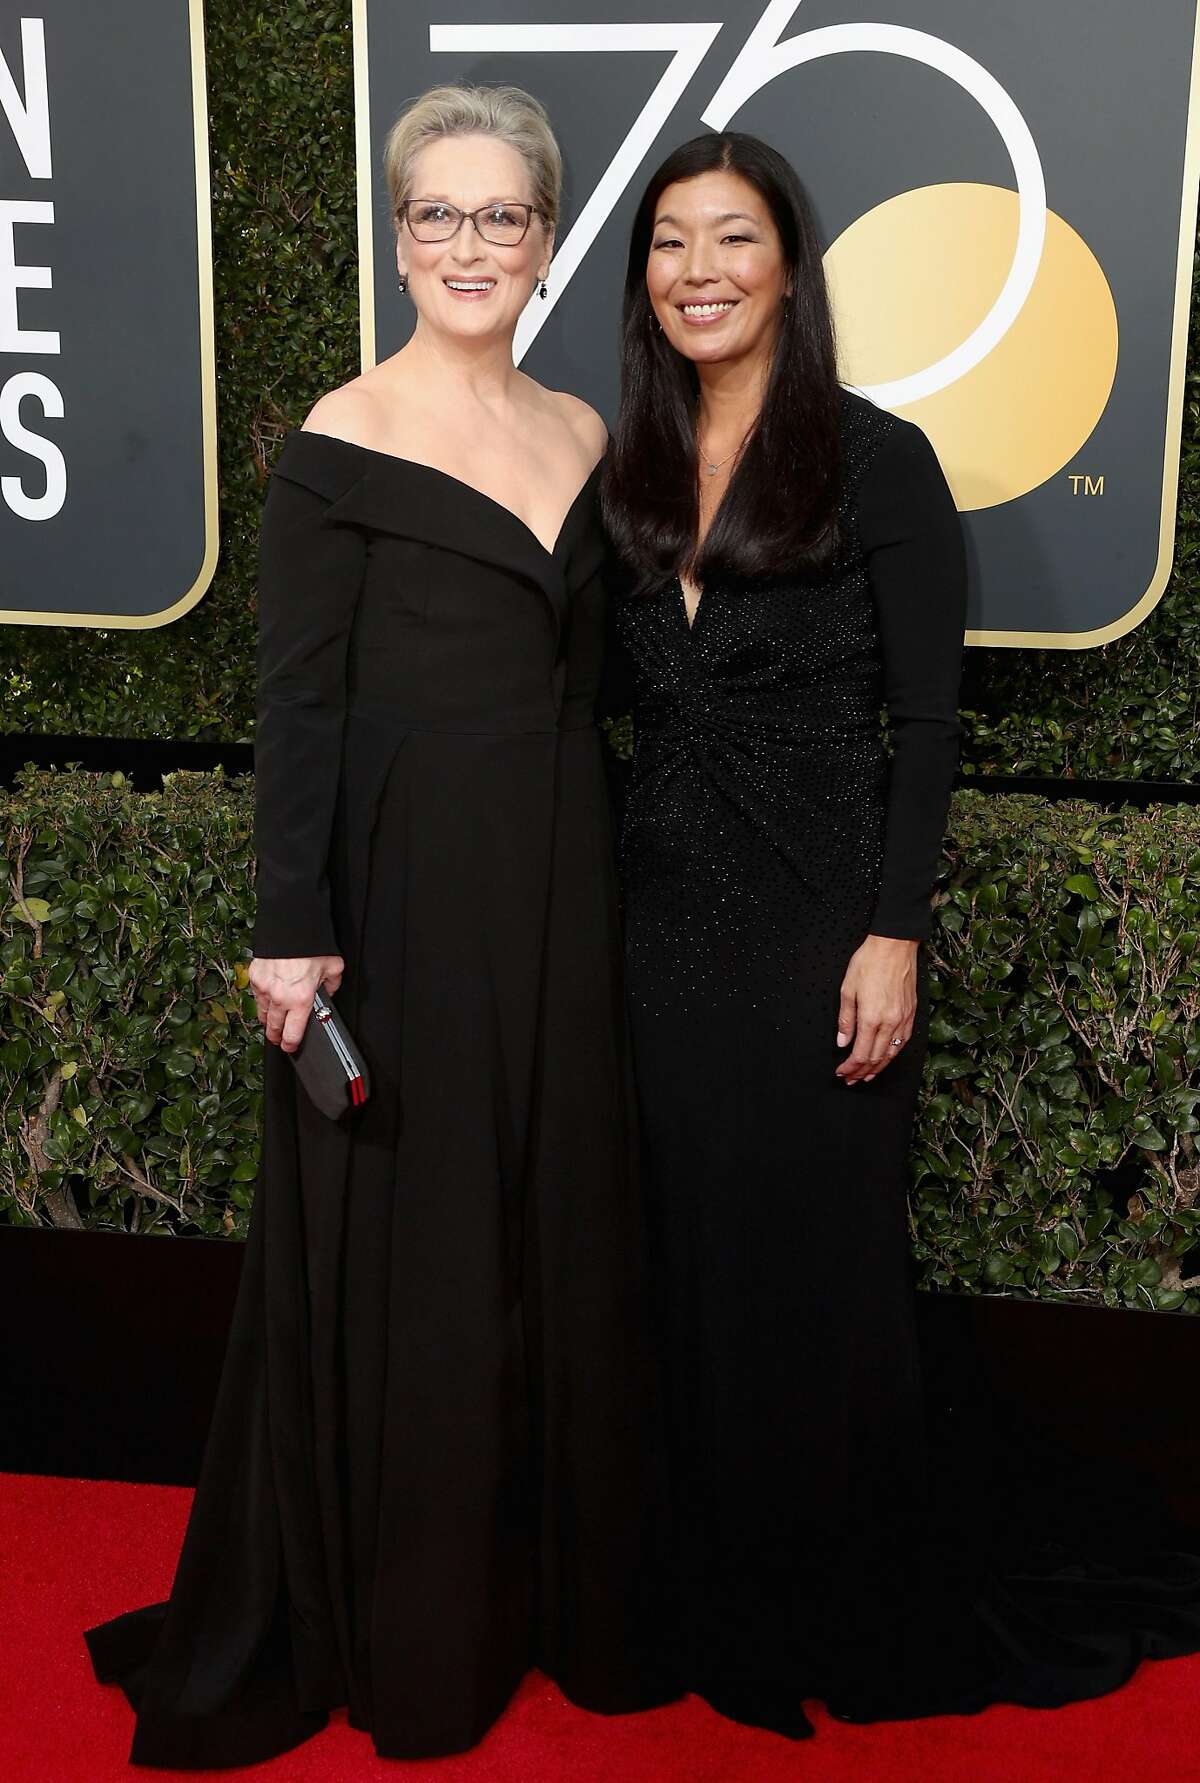 BEVERLY HILLS, CA - JANUARY 07: Meryl Streep (L) and Ai-jen Poo attends The 75th Annual Golden Globe Awards at The Beverly Hilton Hotel on January 7, 2018 in Beverly Hills, California. (Photo by Frederick M. Brown/Getty Images)